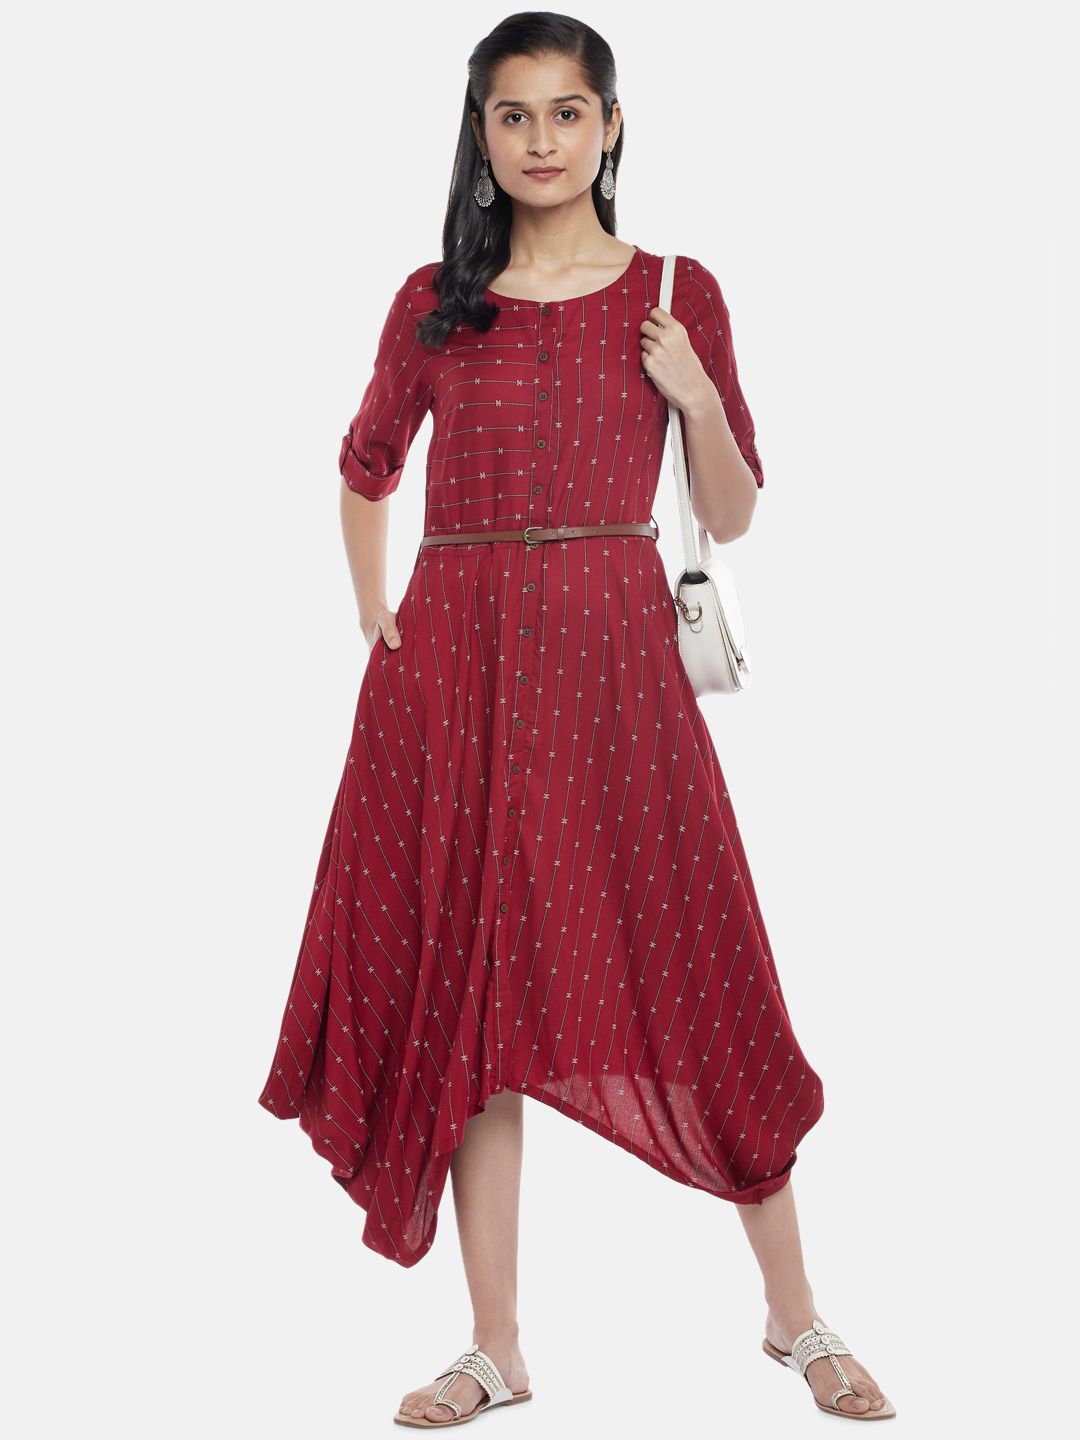 AKKRITI BY PANTALOONS Red A-Line Midi Dress Price in India